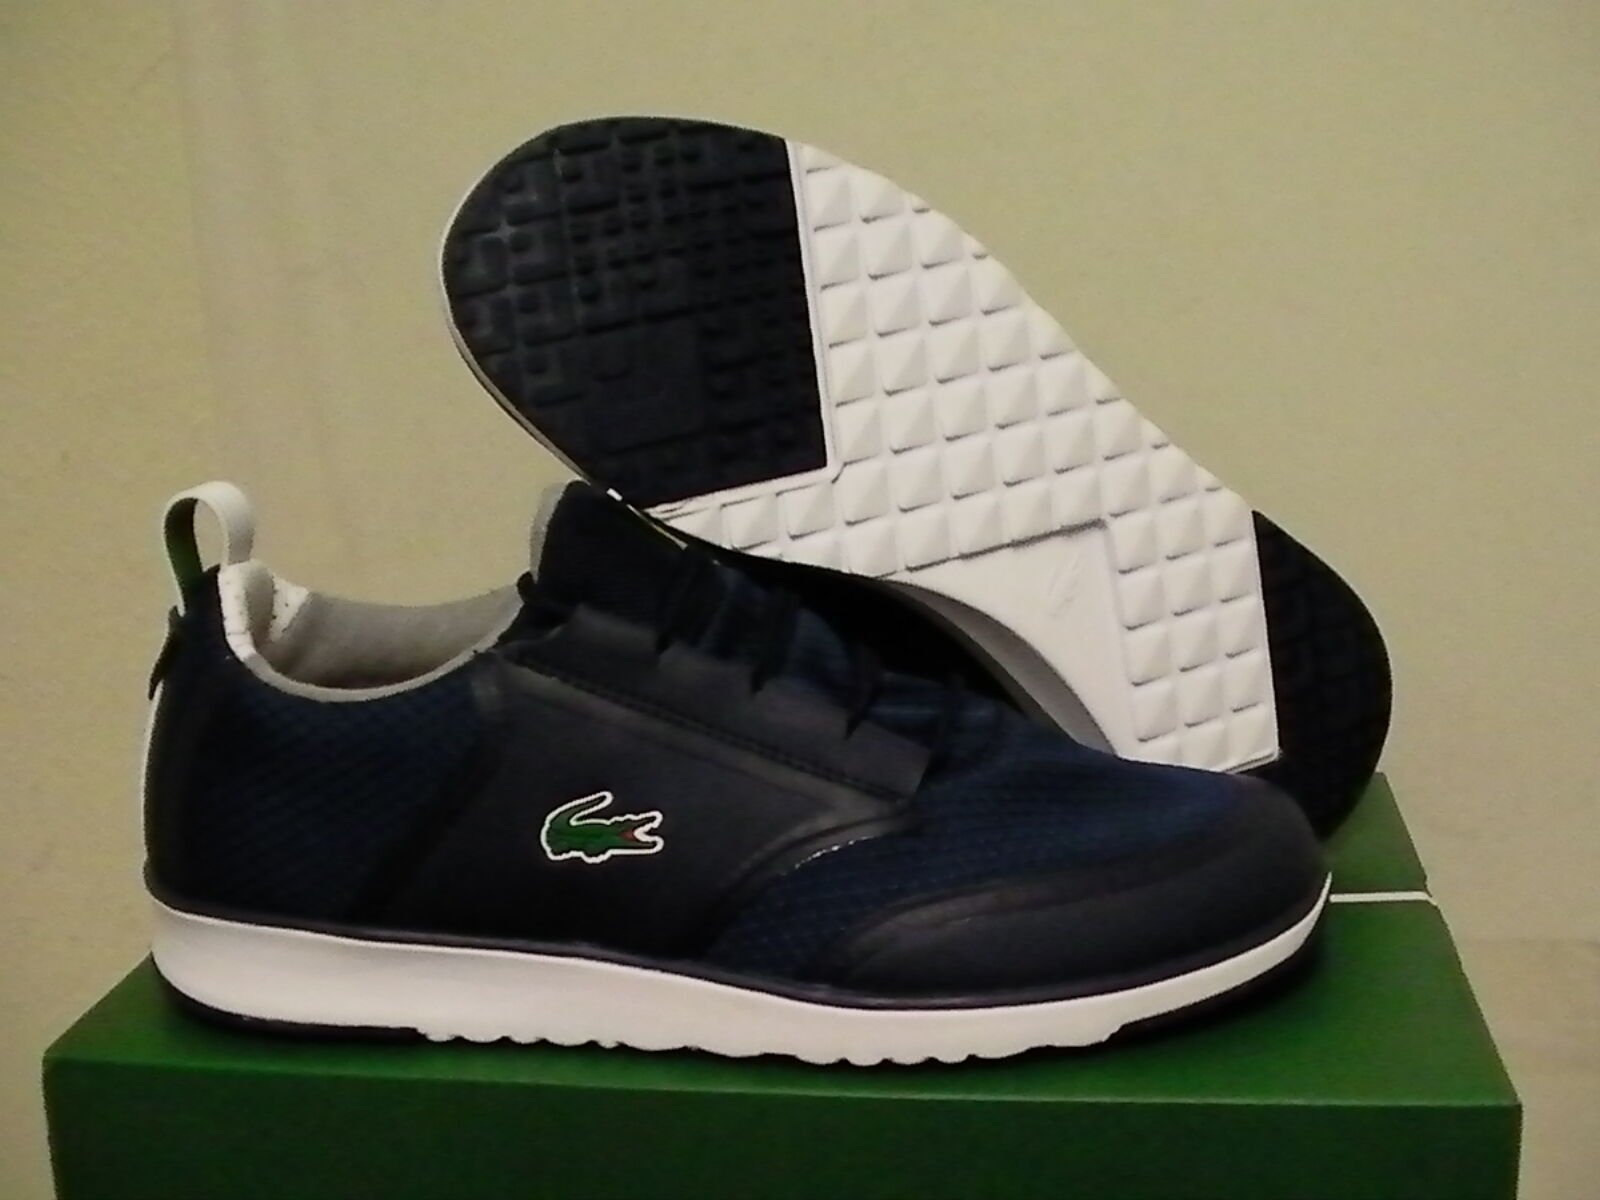 Lacoste shoes L.IGHT LT12 spm txt/syn dark blue training size 8 new with box  - £75.13 GBP